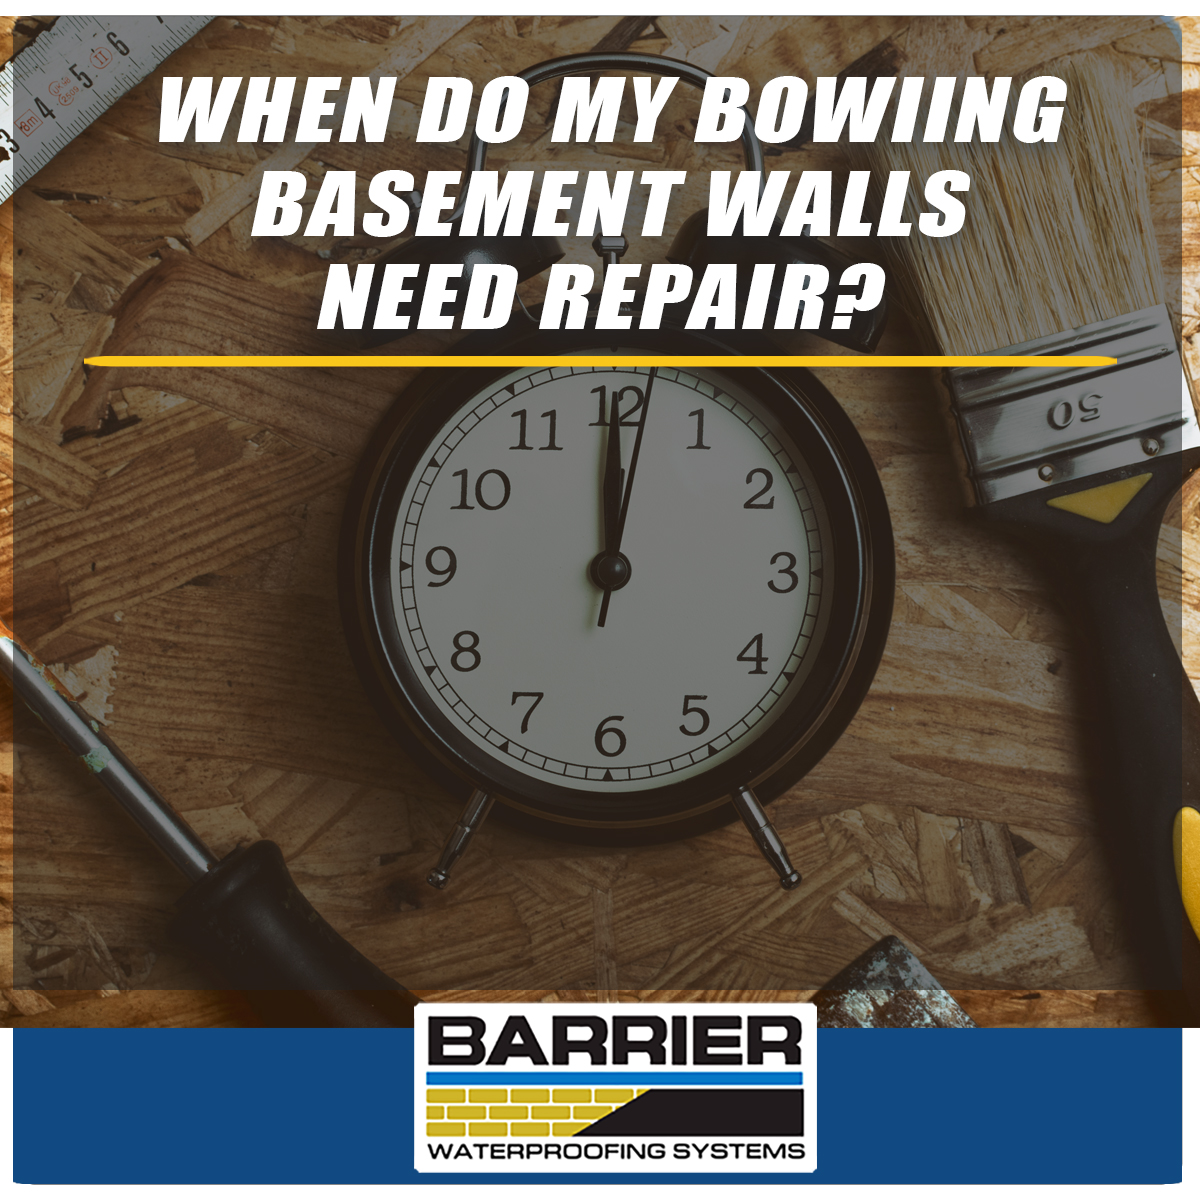 When-Do-My-Bowing-Basement-Walls-Need-Repair